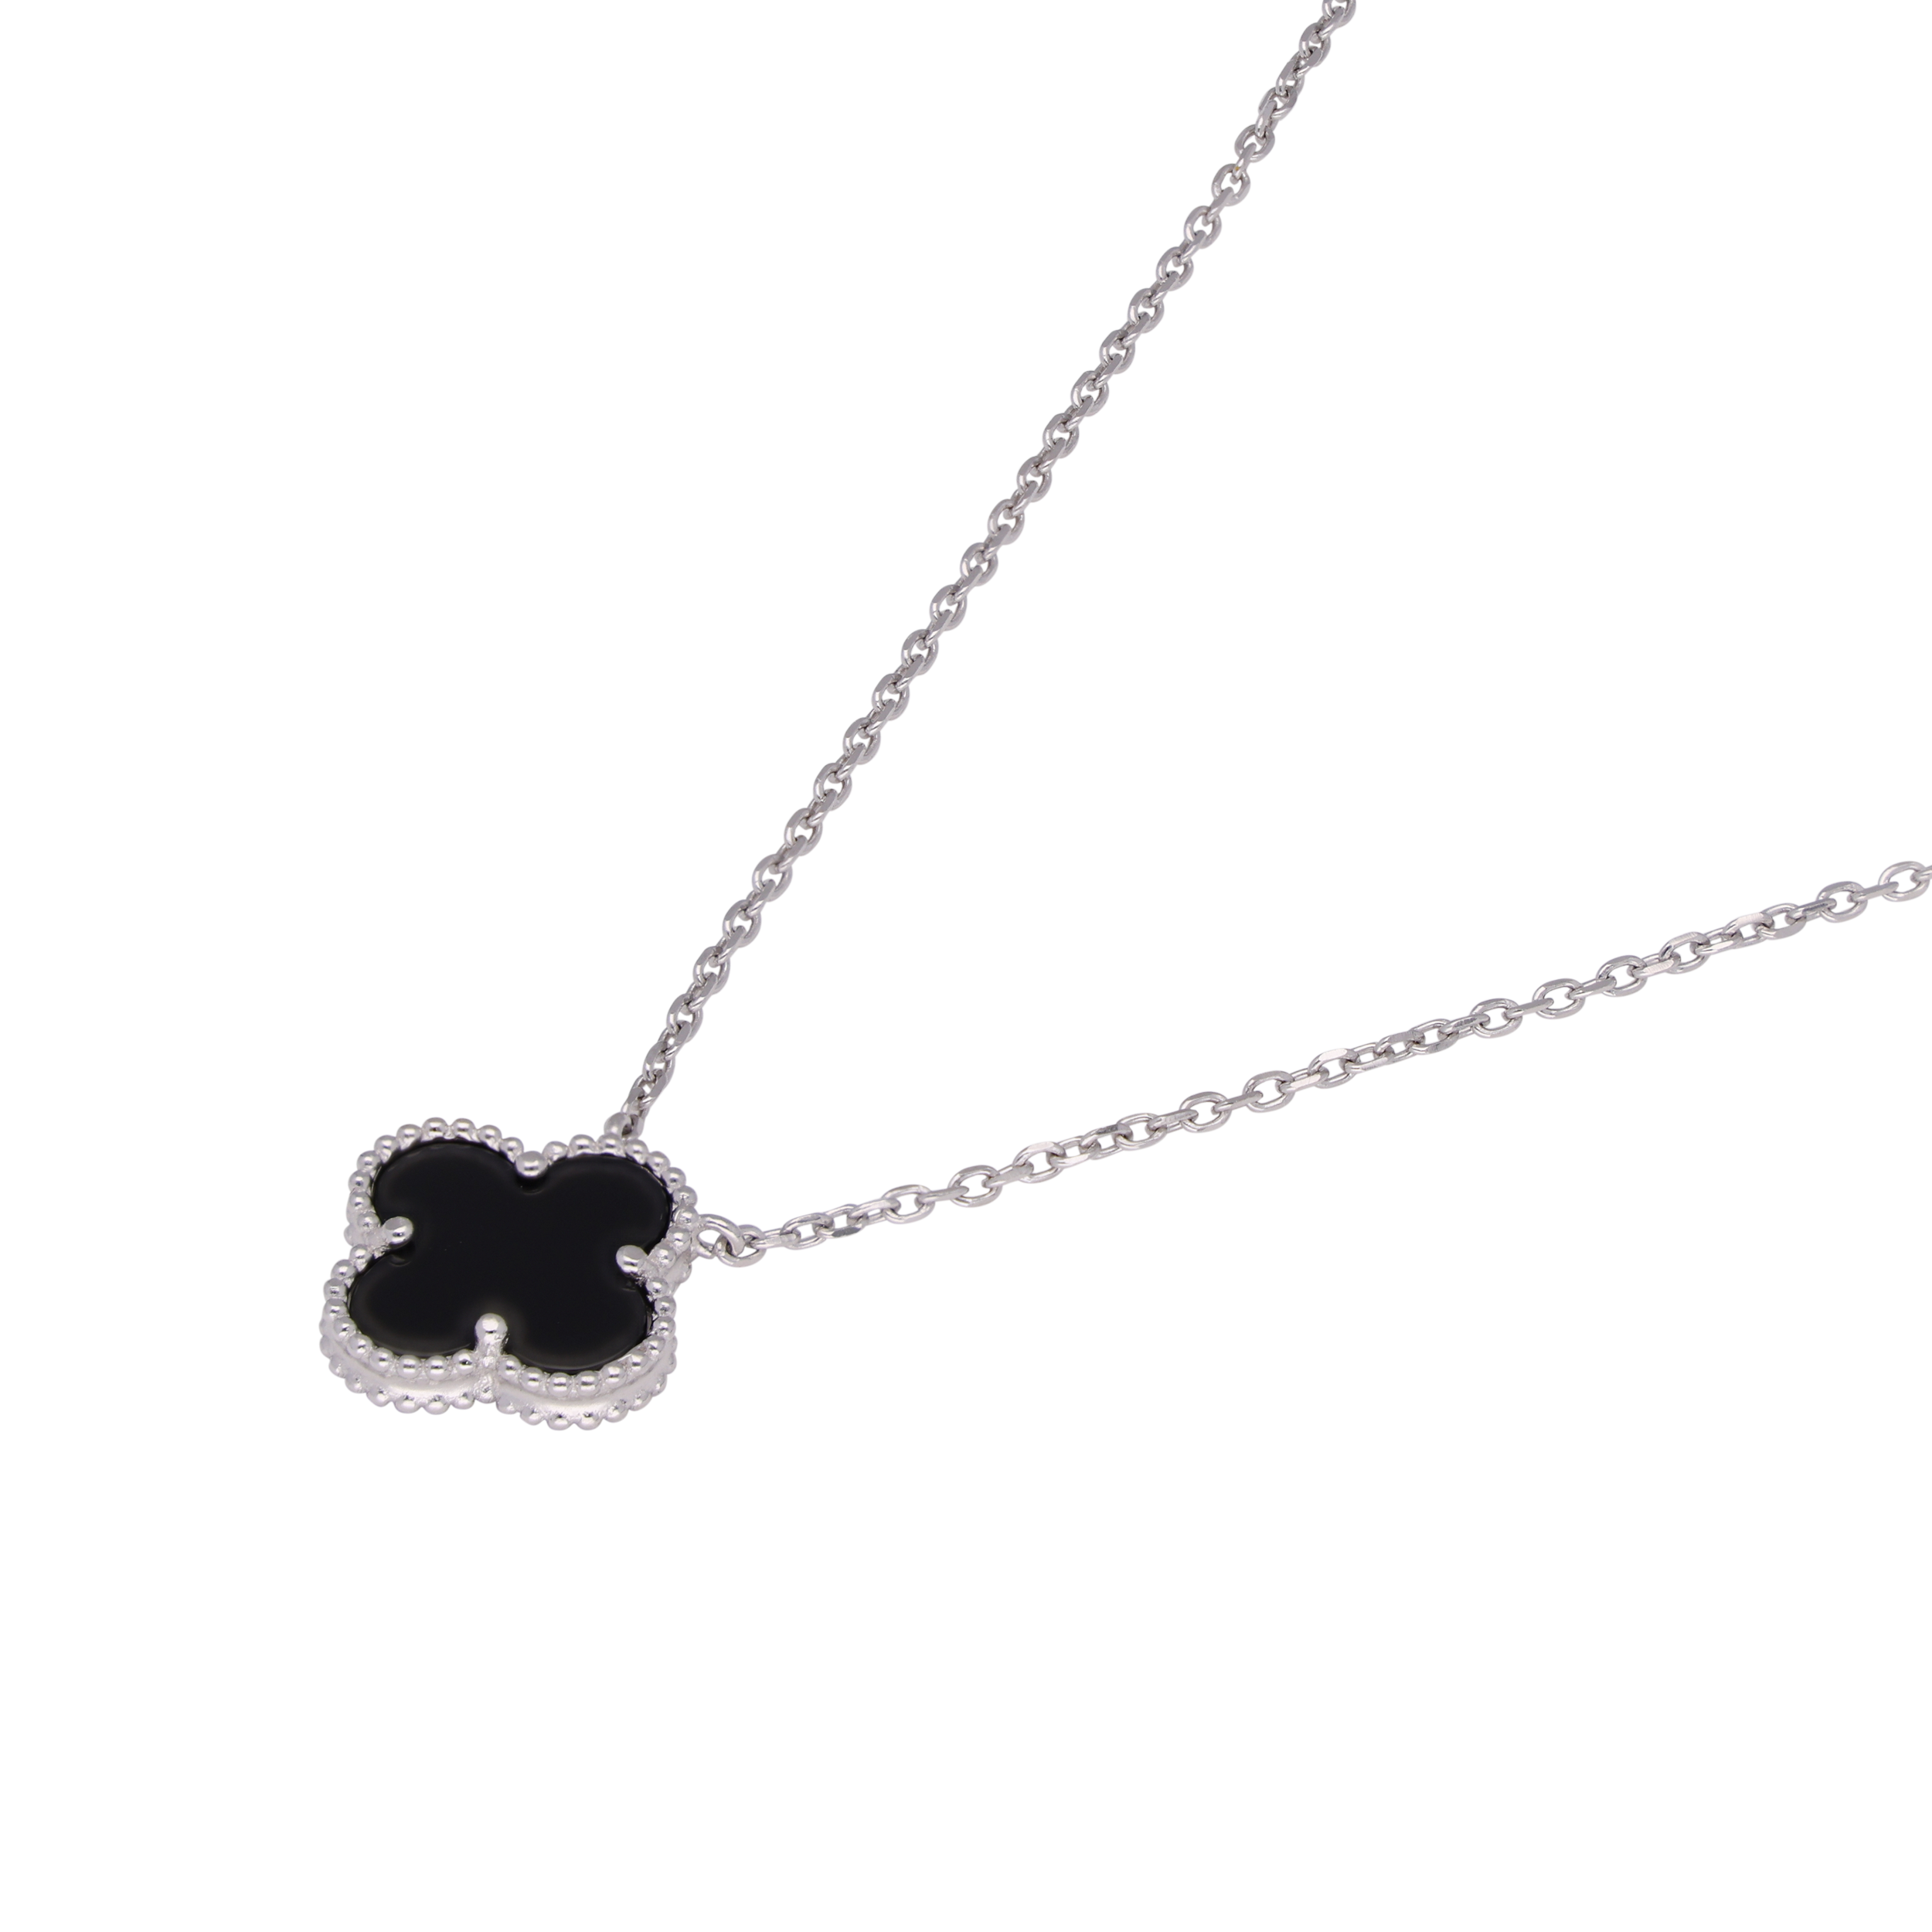 "Floral Harmony: Sterling Silver Pendant Chain with Dual-Colored | SKU : 0002983882, 0002984216, 0002984223, 0002983851